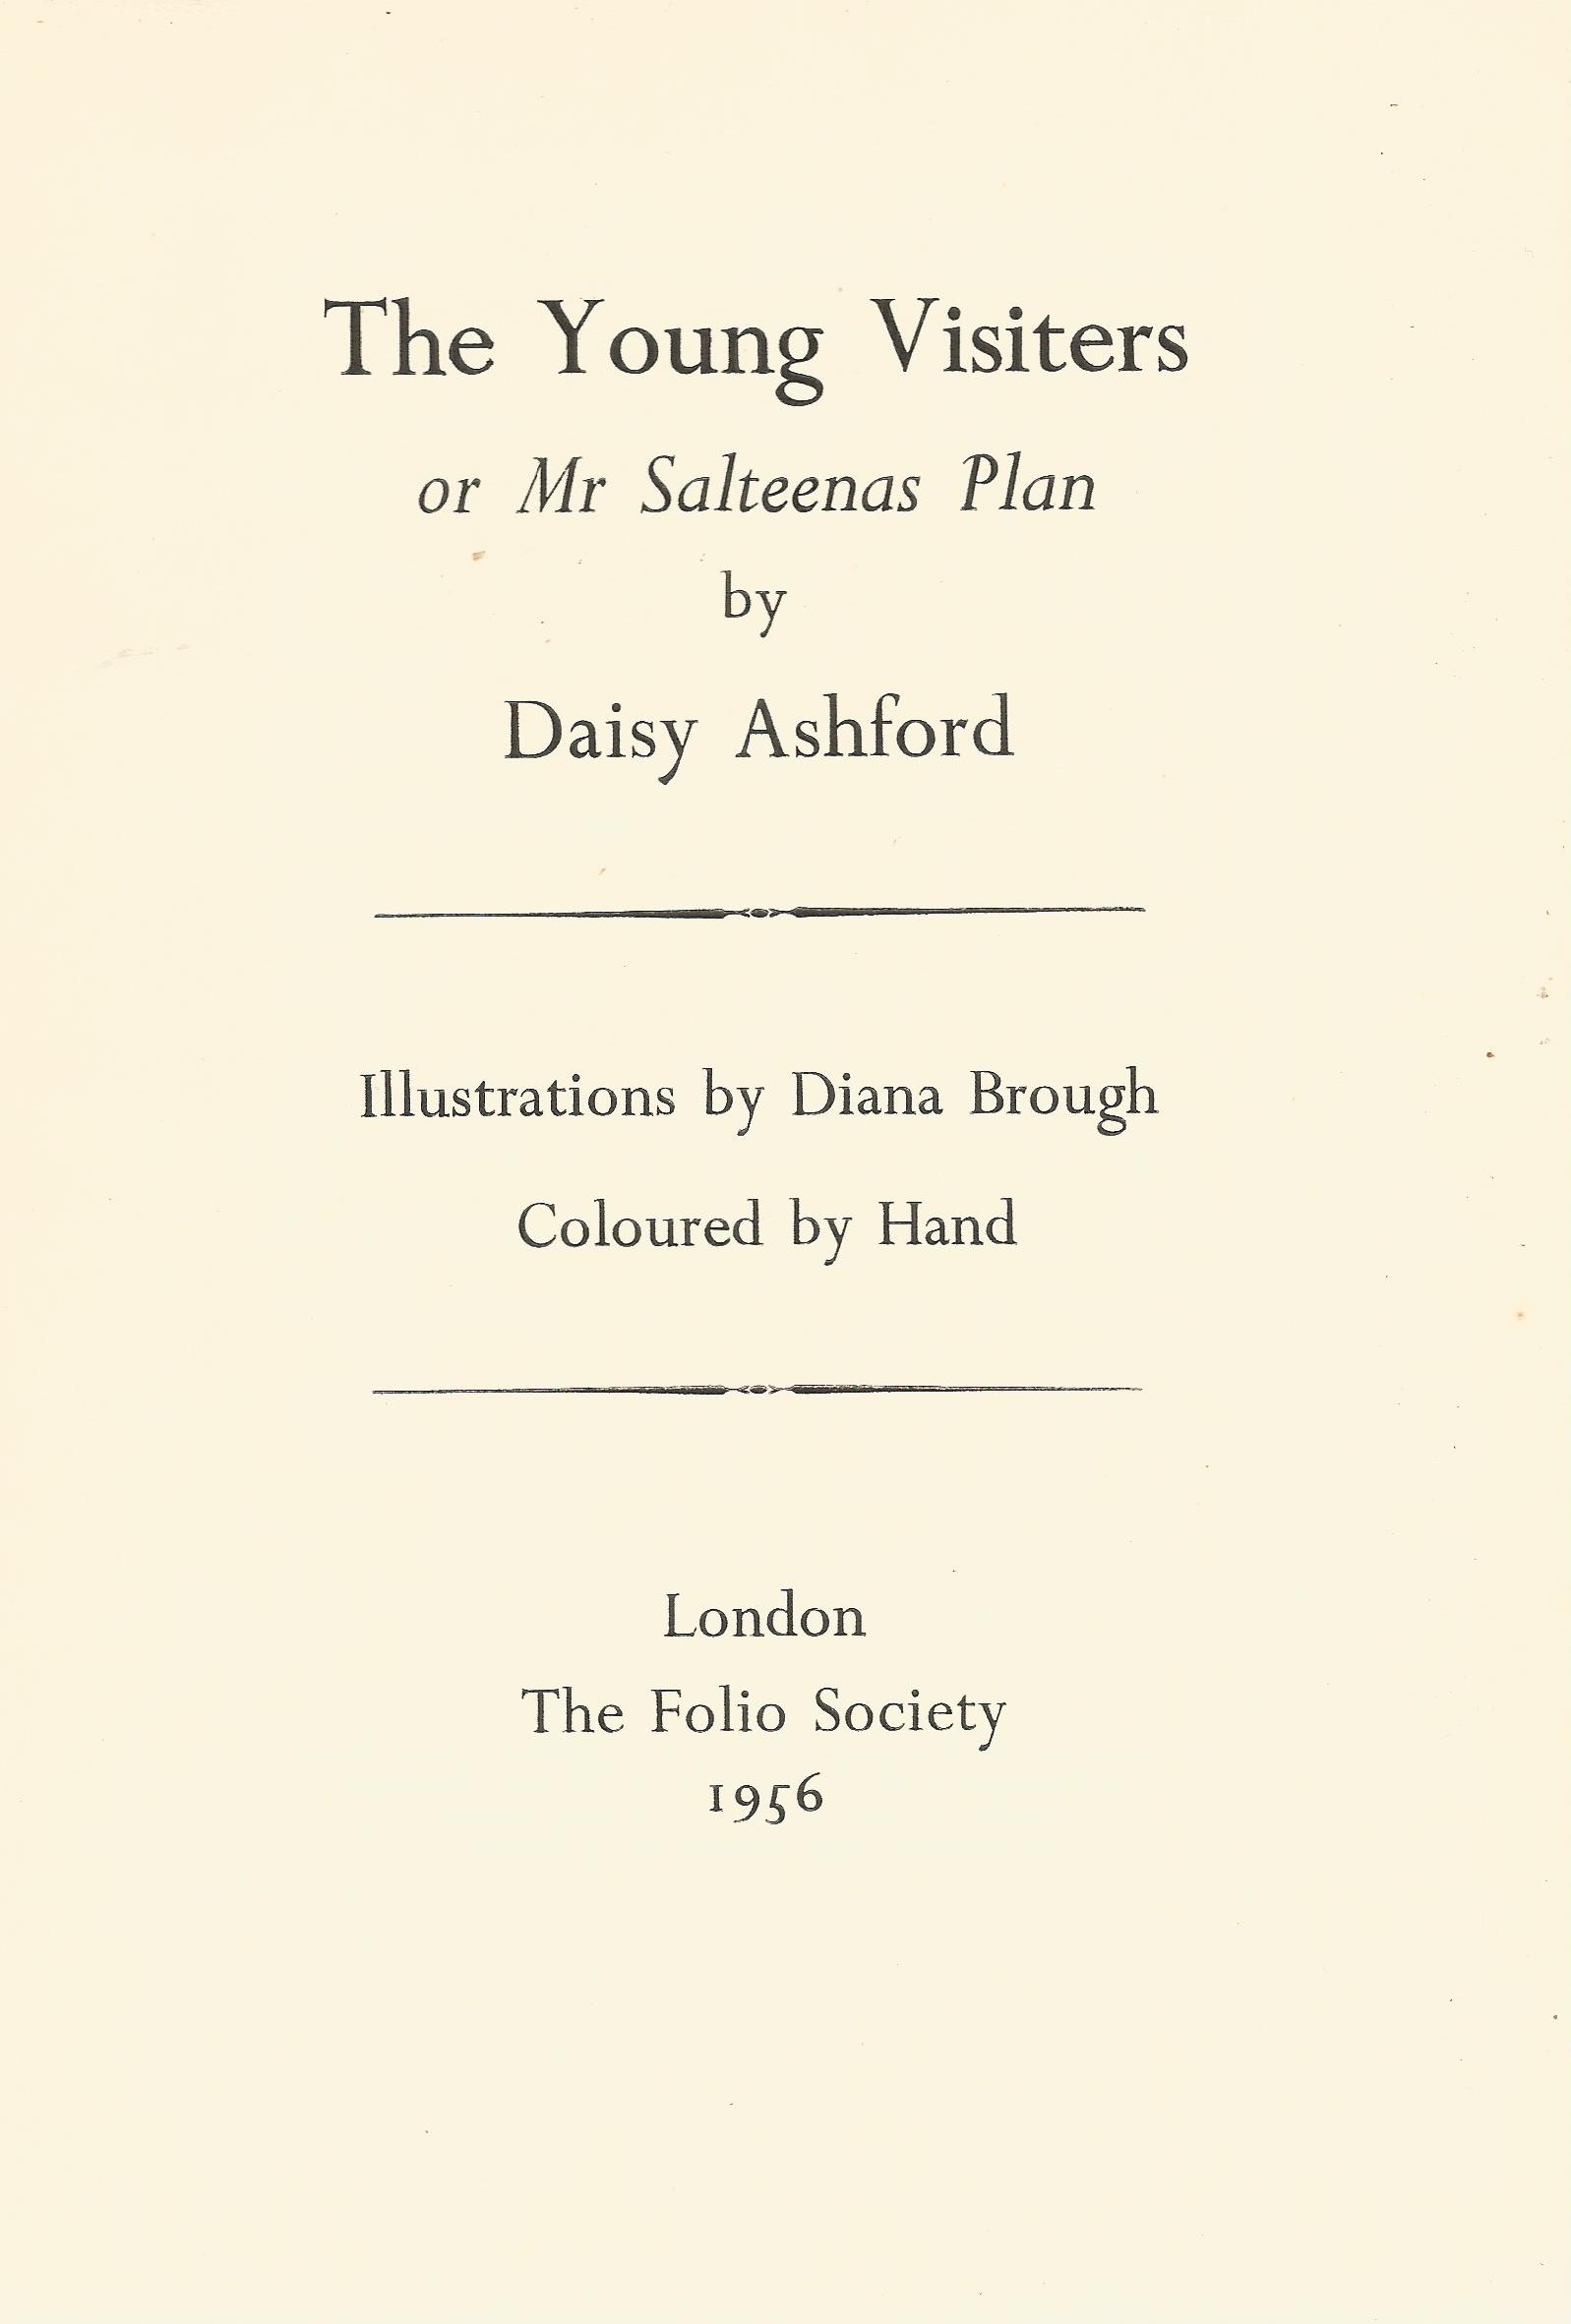 The Young Visitors of Mr Salteenas Plan by Daisy Ashford 1956 Hardback Book with Slipcase - Image 2 of 2